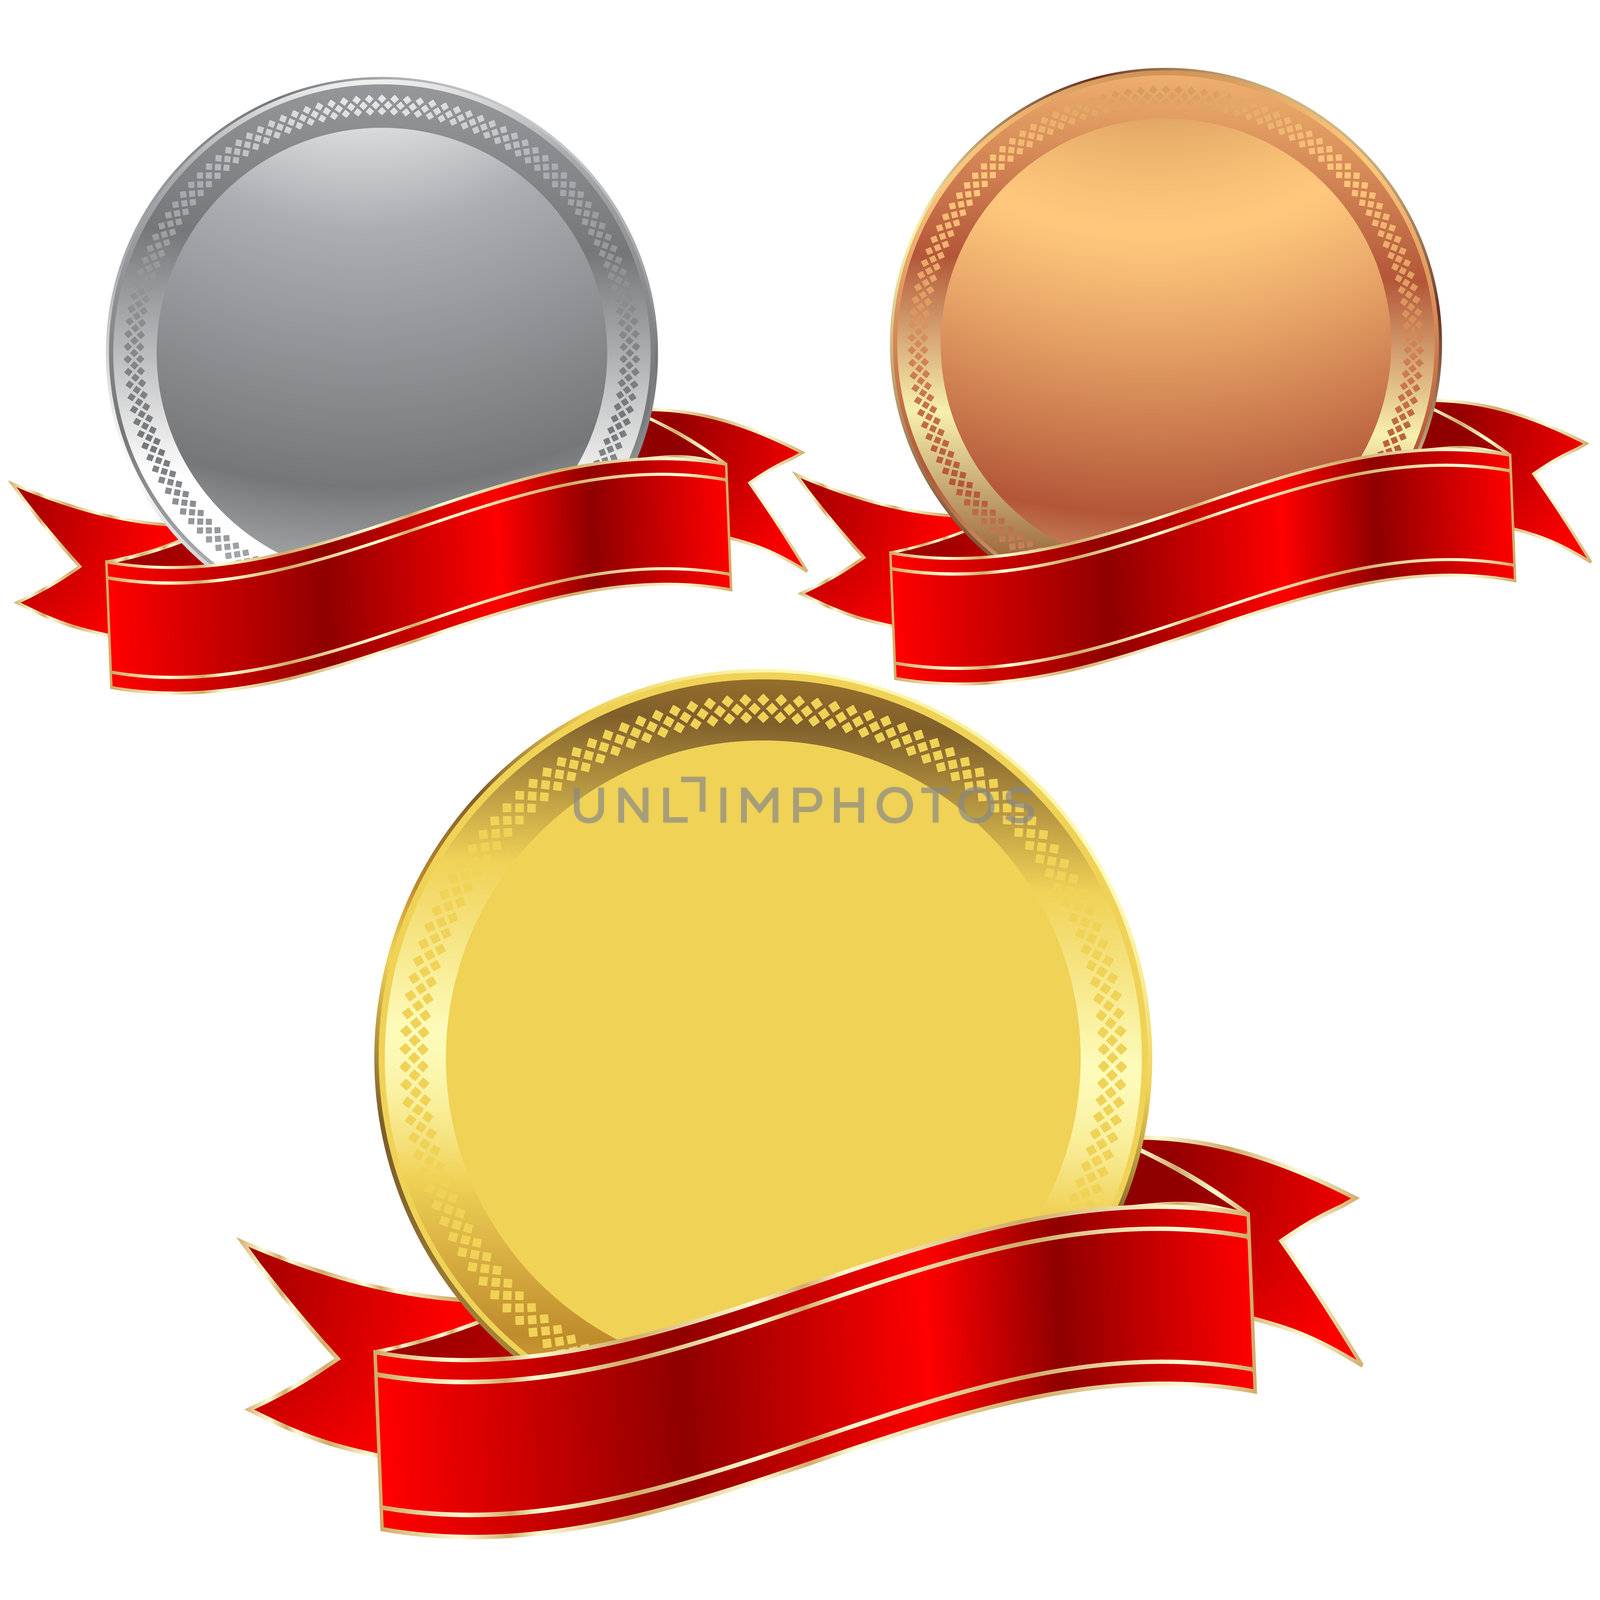 Golden, silver and bronze seal with a red ribbon